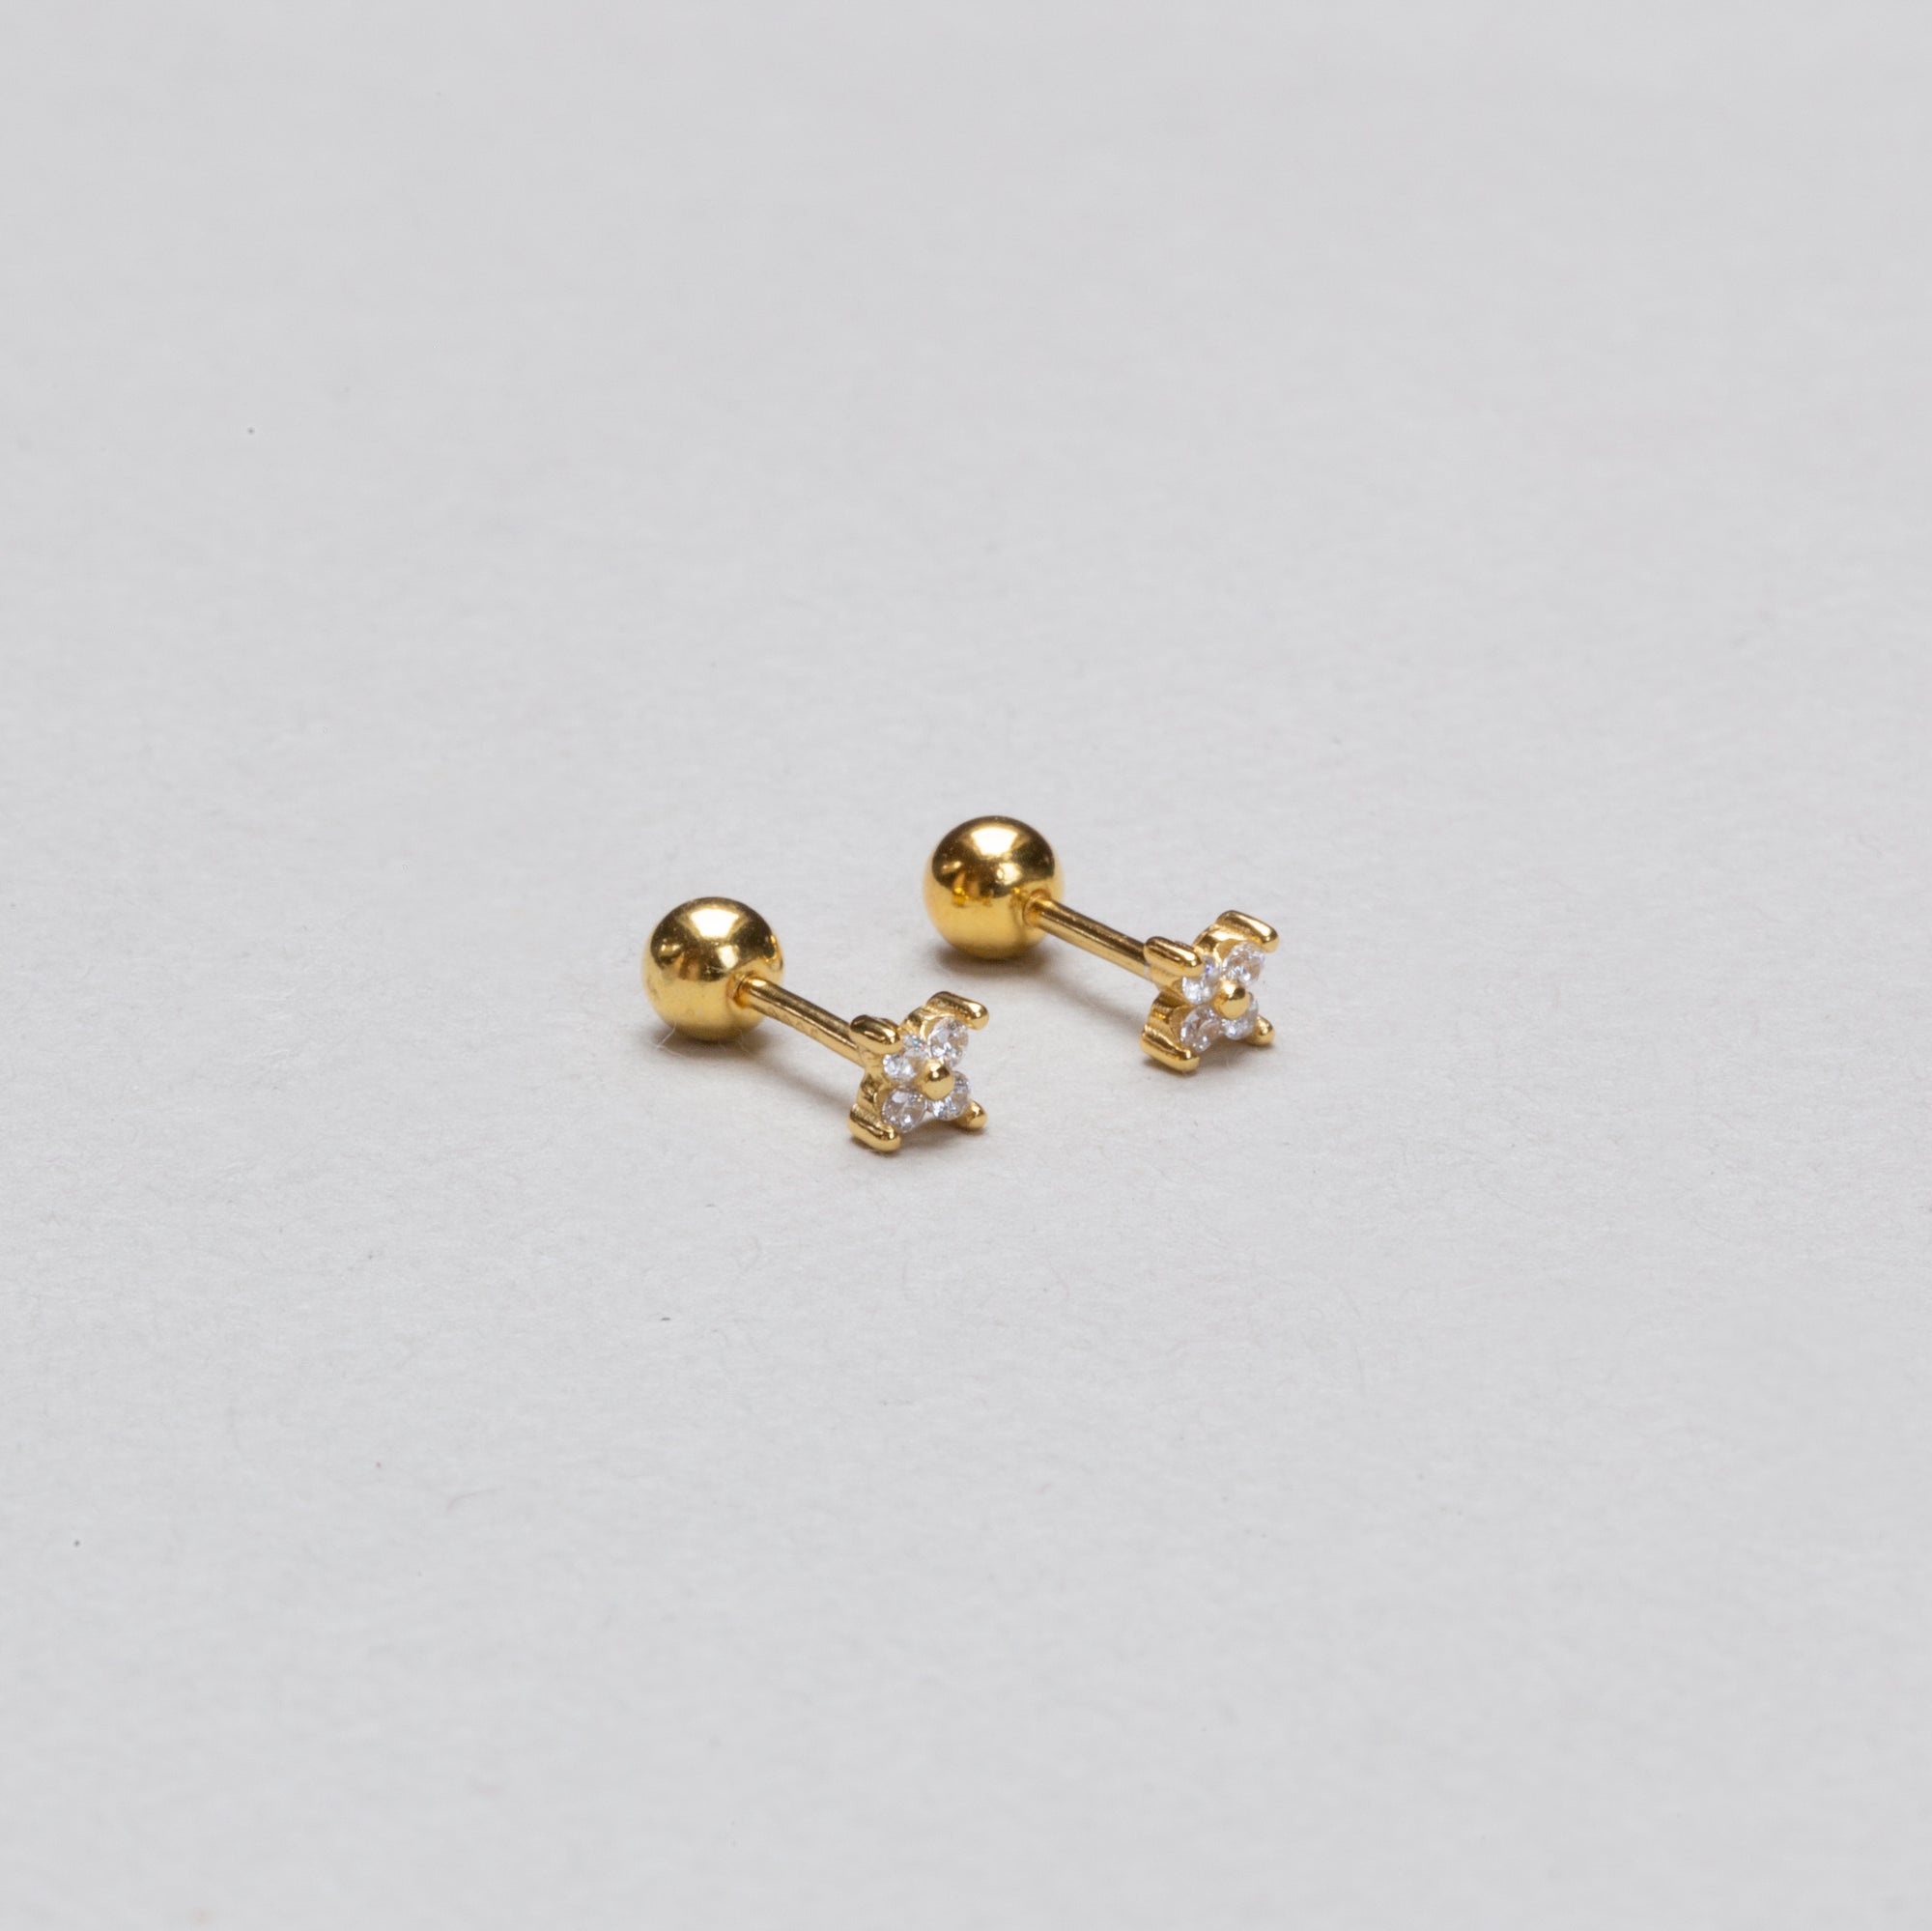 Gold-plated Flower Stud Cartilage Earring